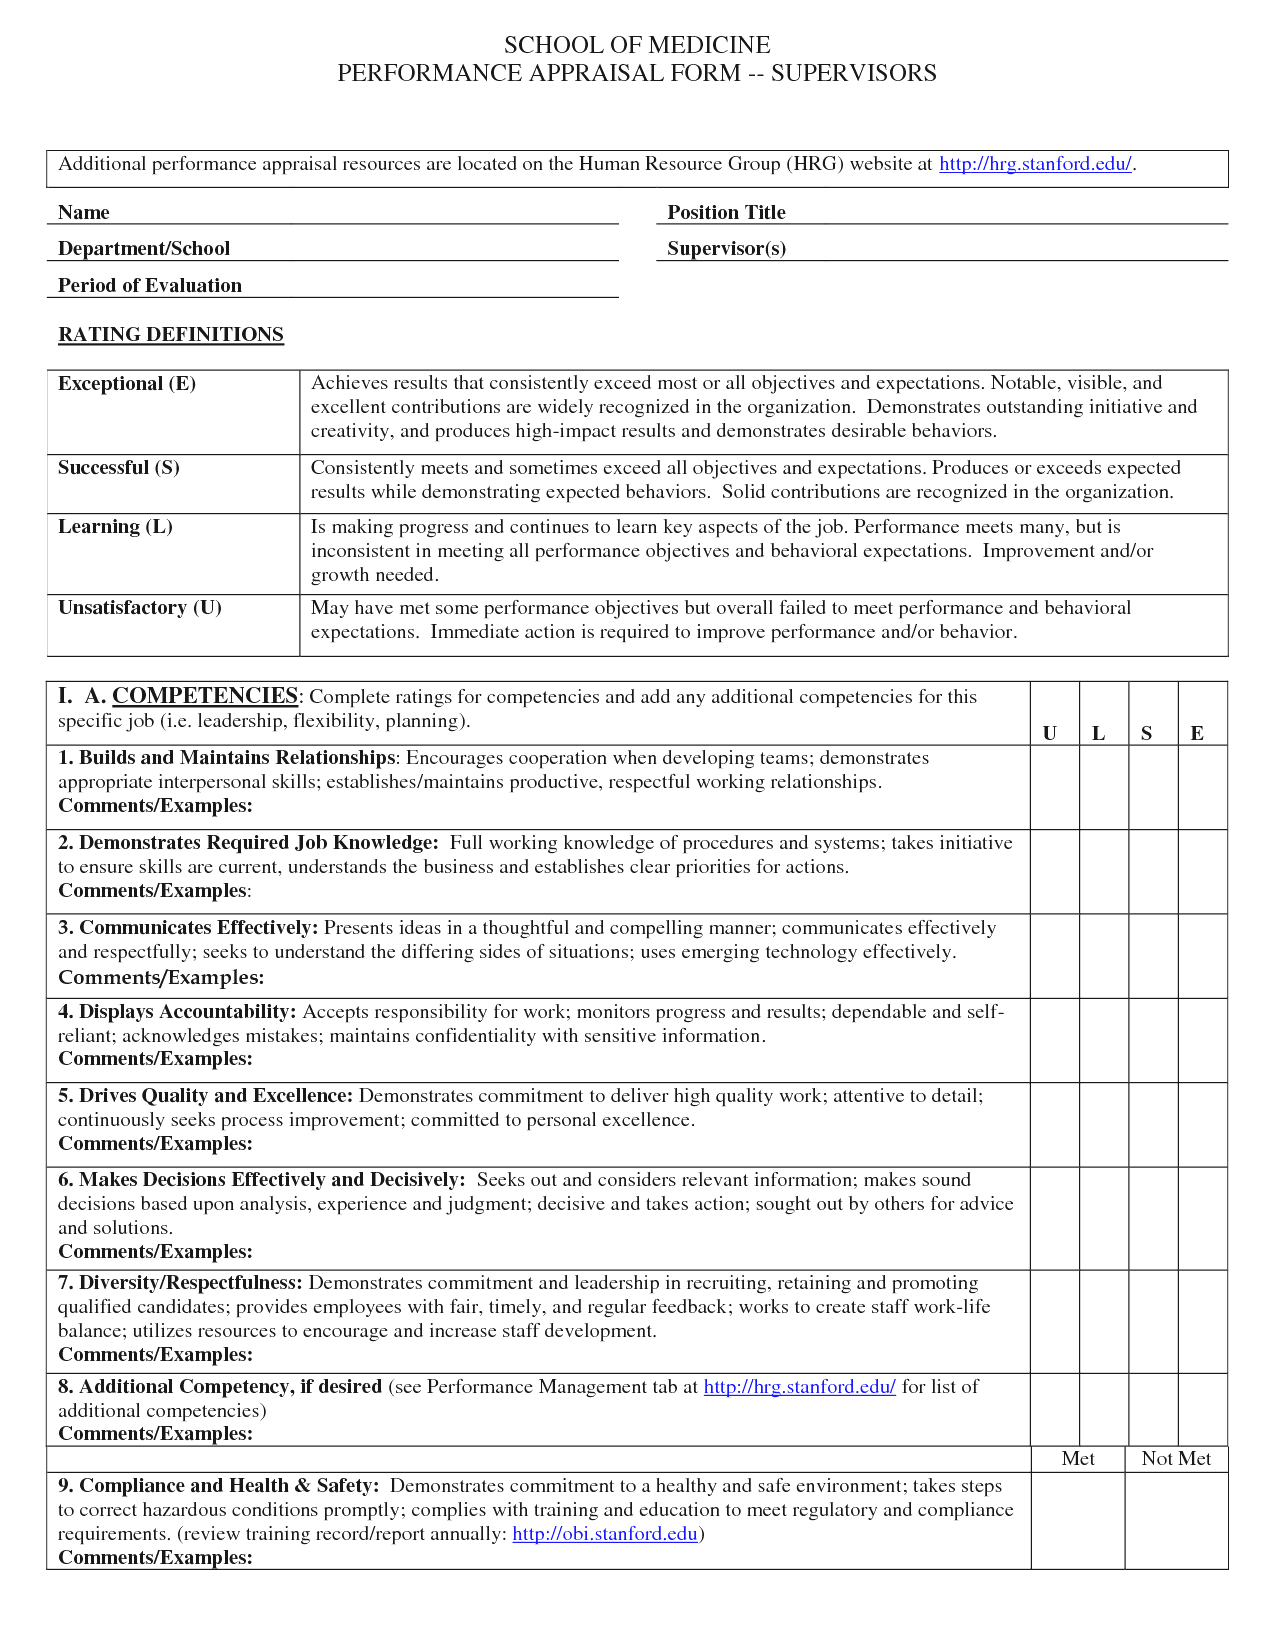 Employee Performance Evaluation Report Sample And For Training Evaluation Report Template